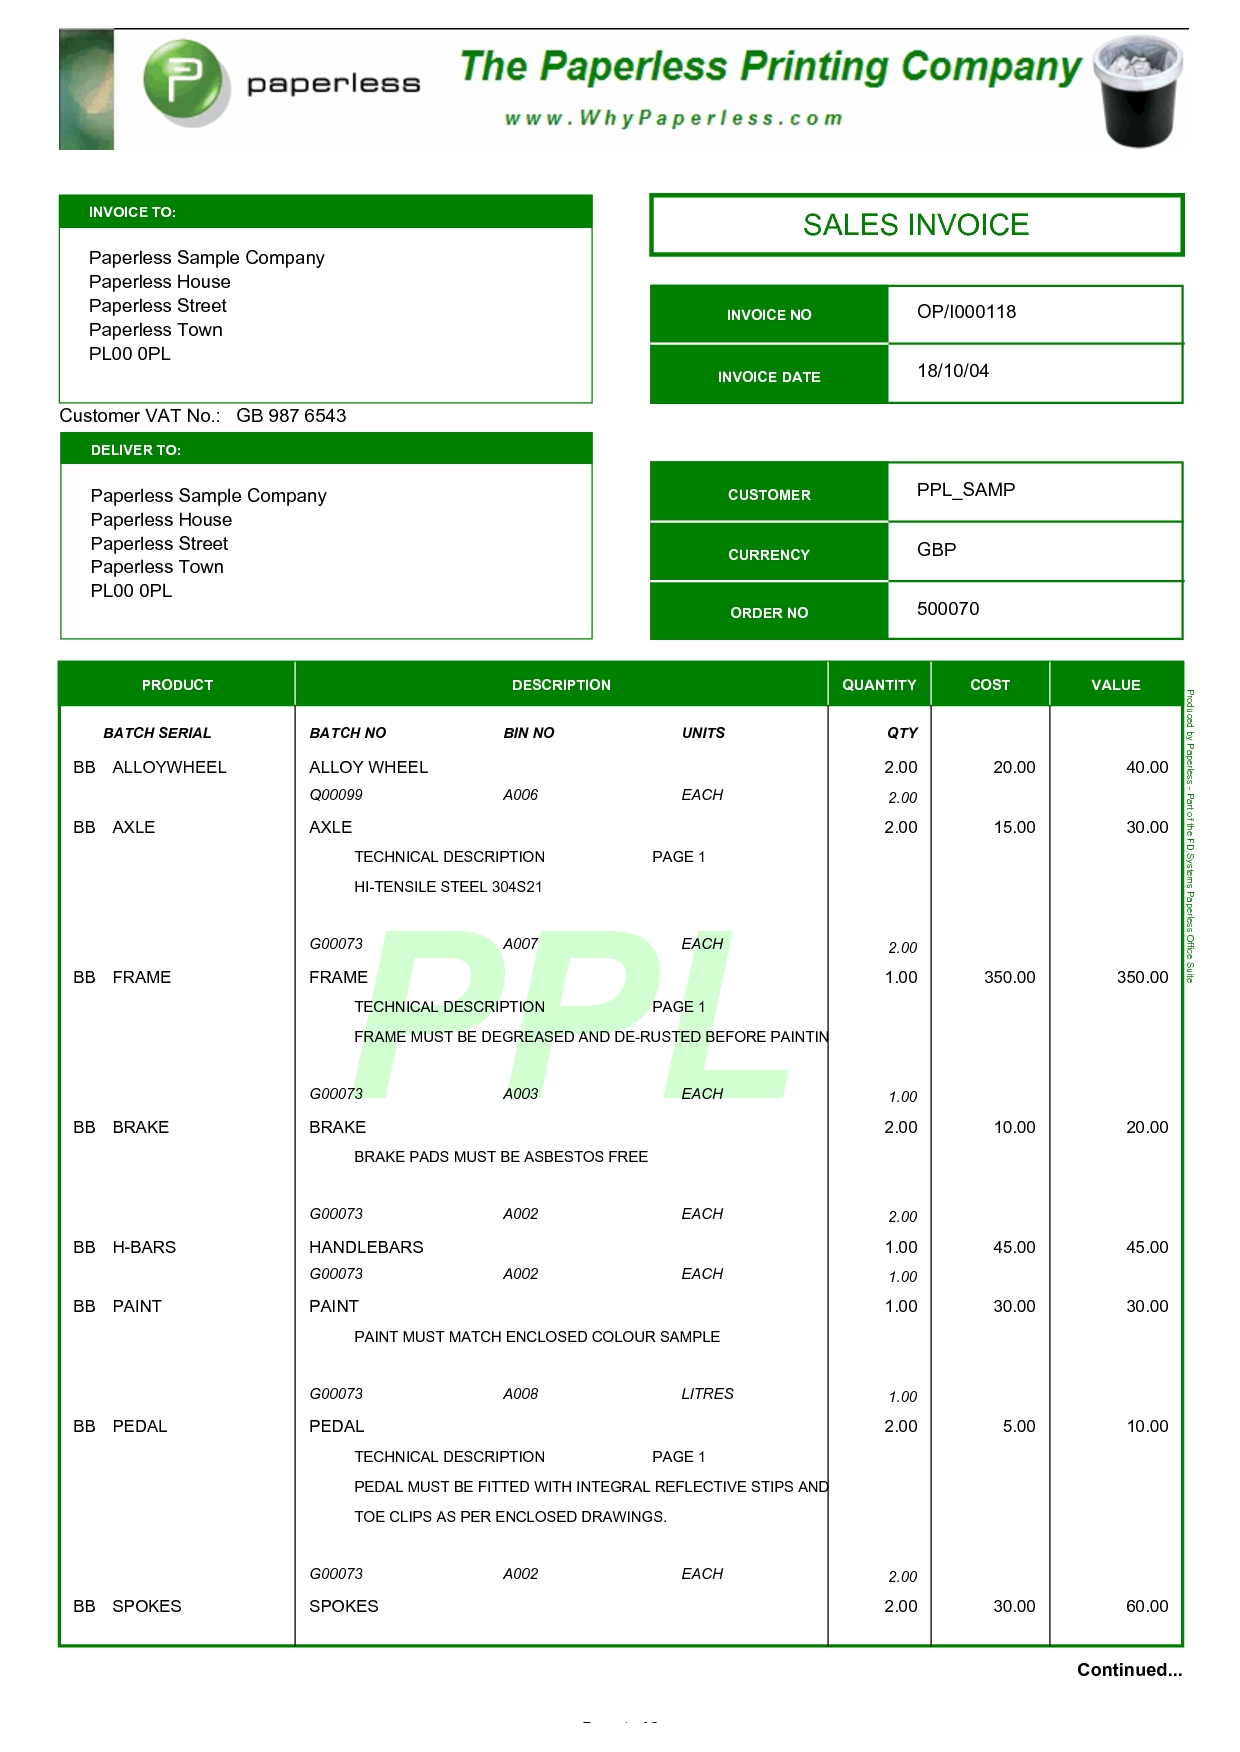 sales invoice format sales invoice template invoice templat sales invoice form free 1240 X 1752